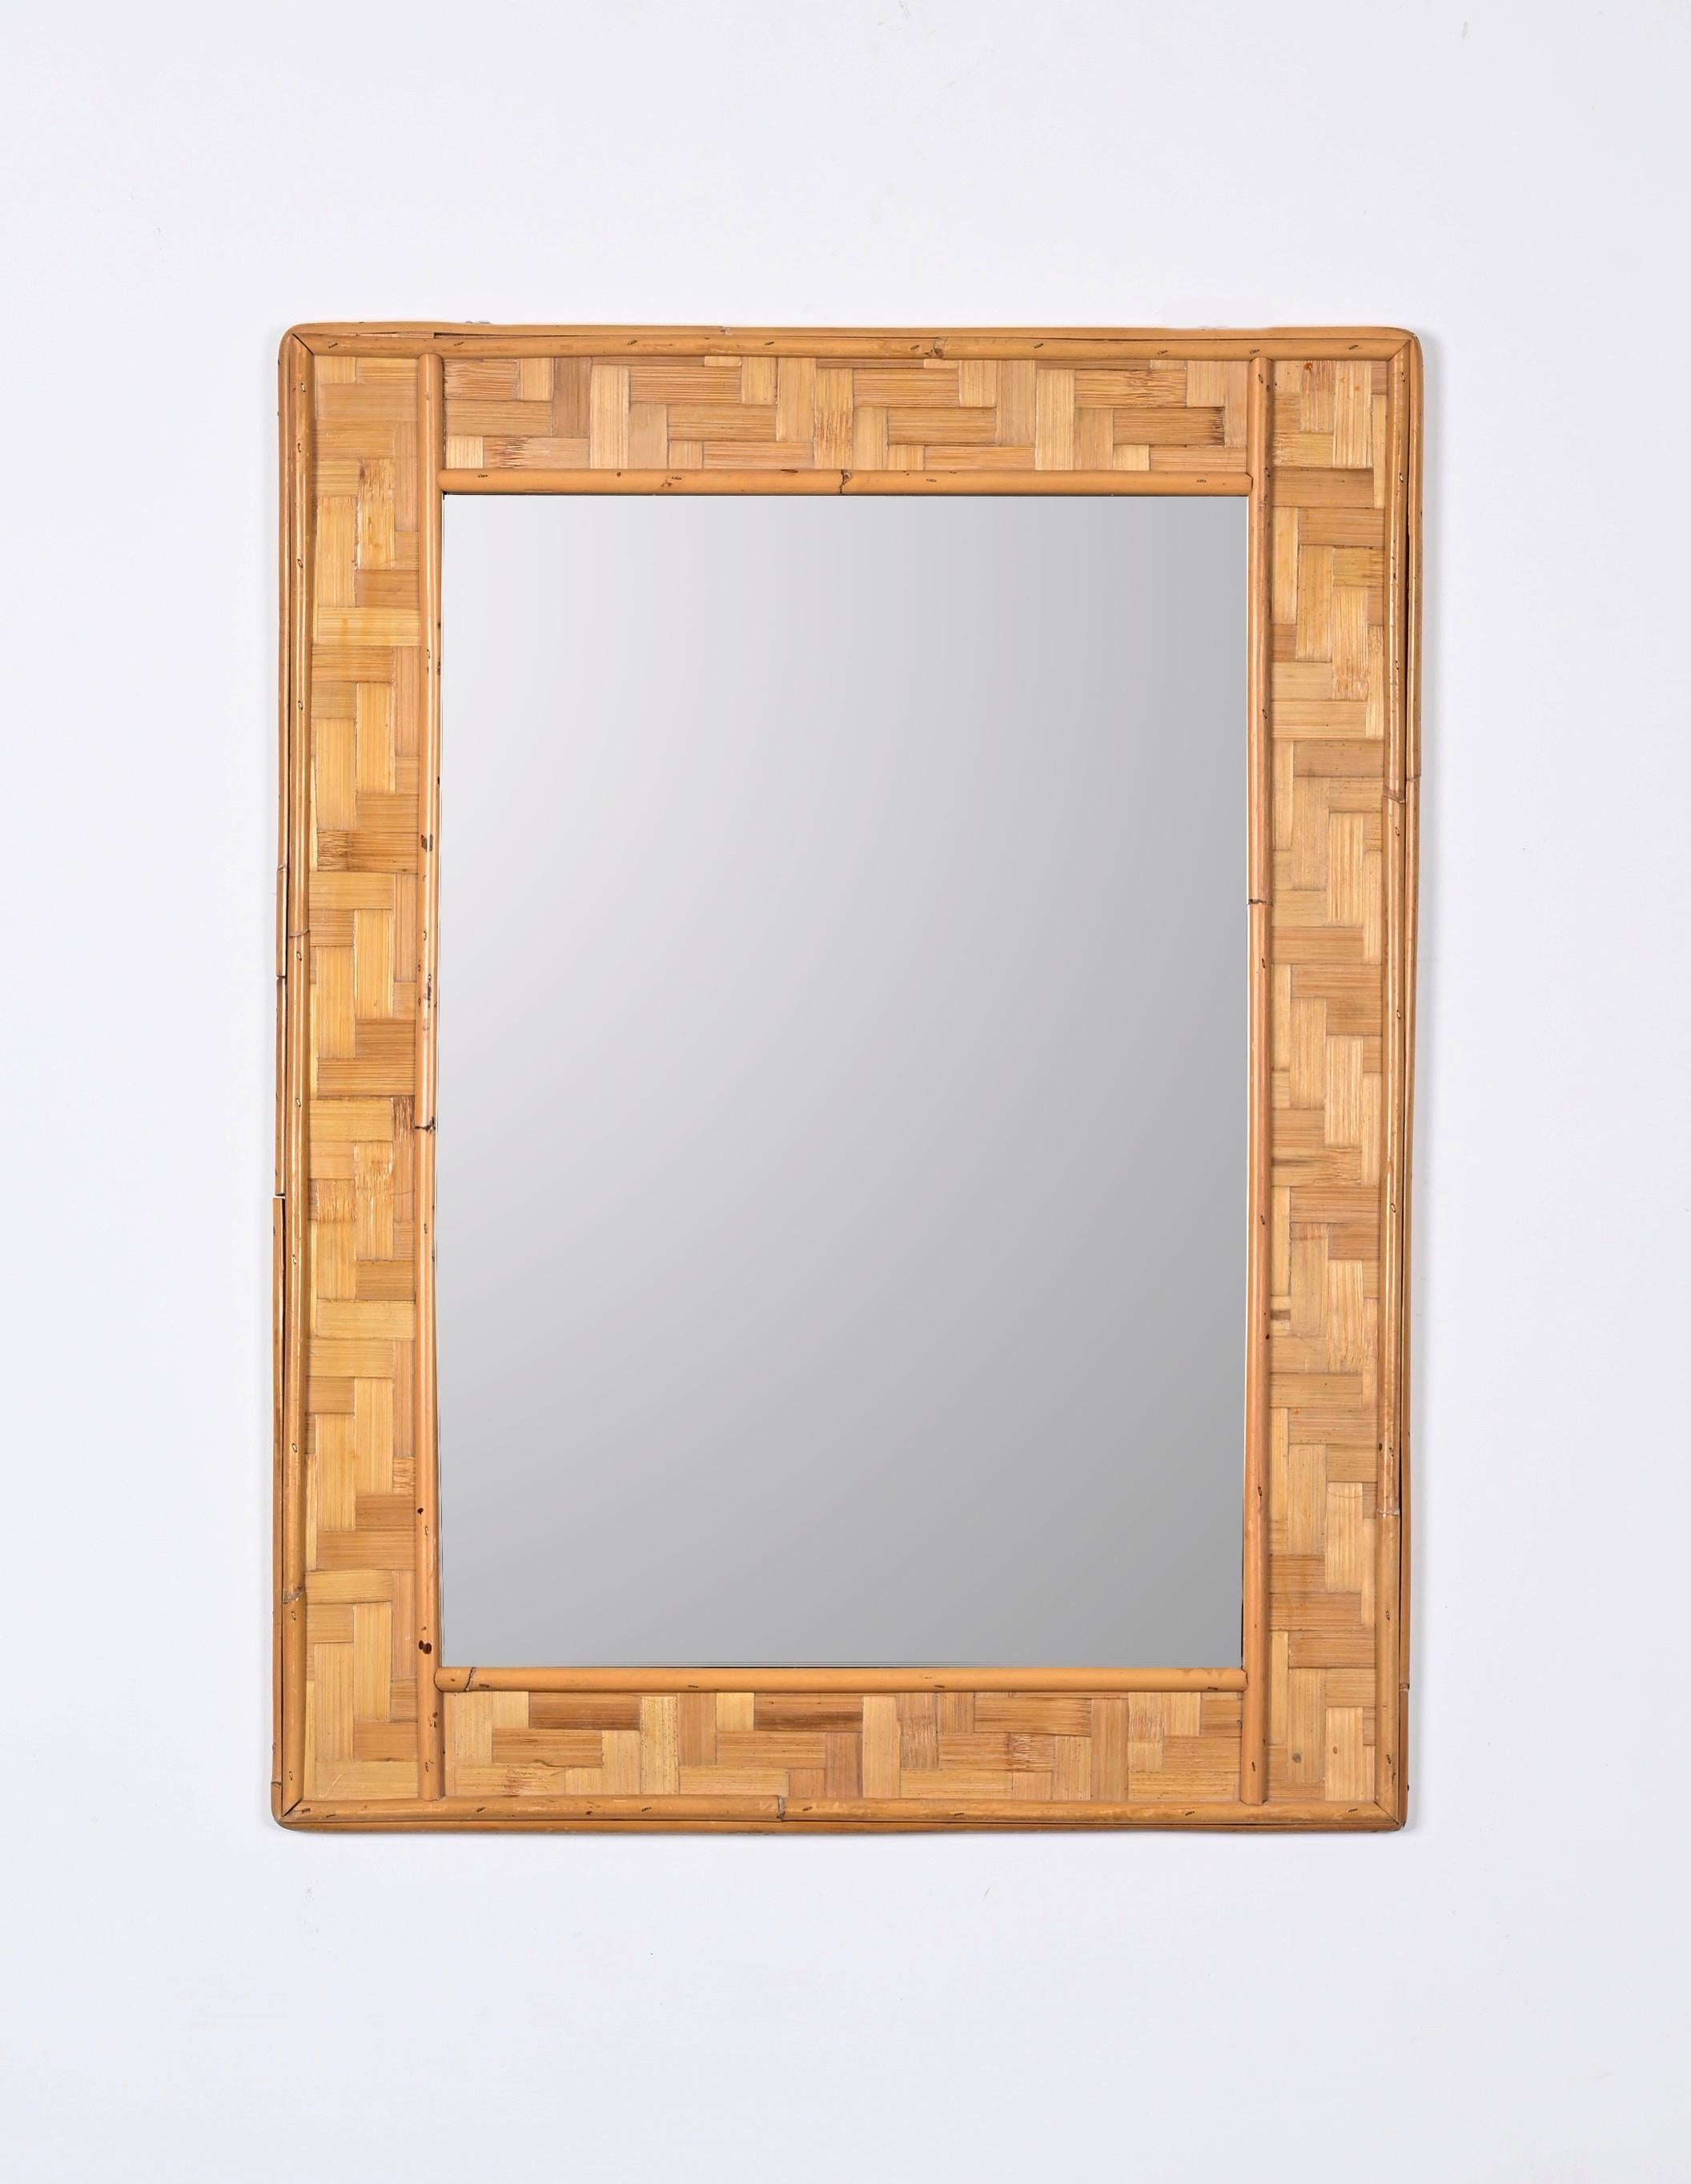 Midcentury Rectangular Bamboo and Woven Rattan Frame Italian Mirror, 1960s For Sale 4